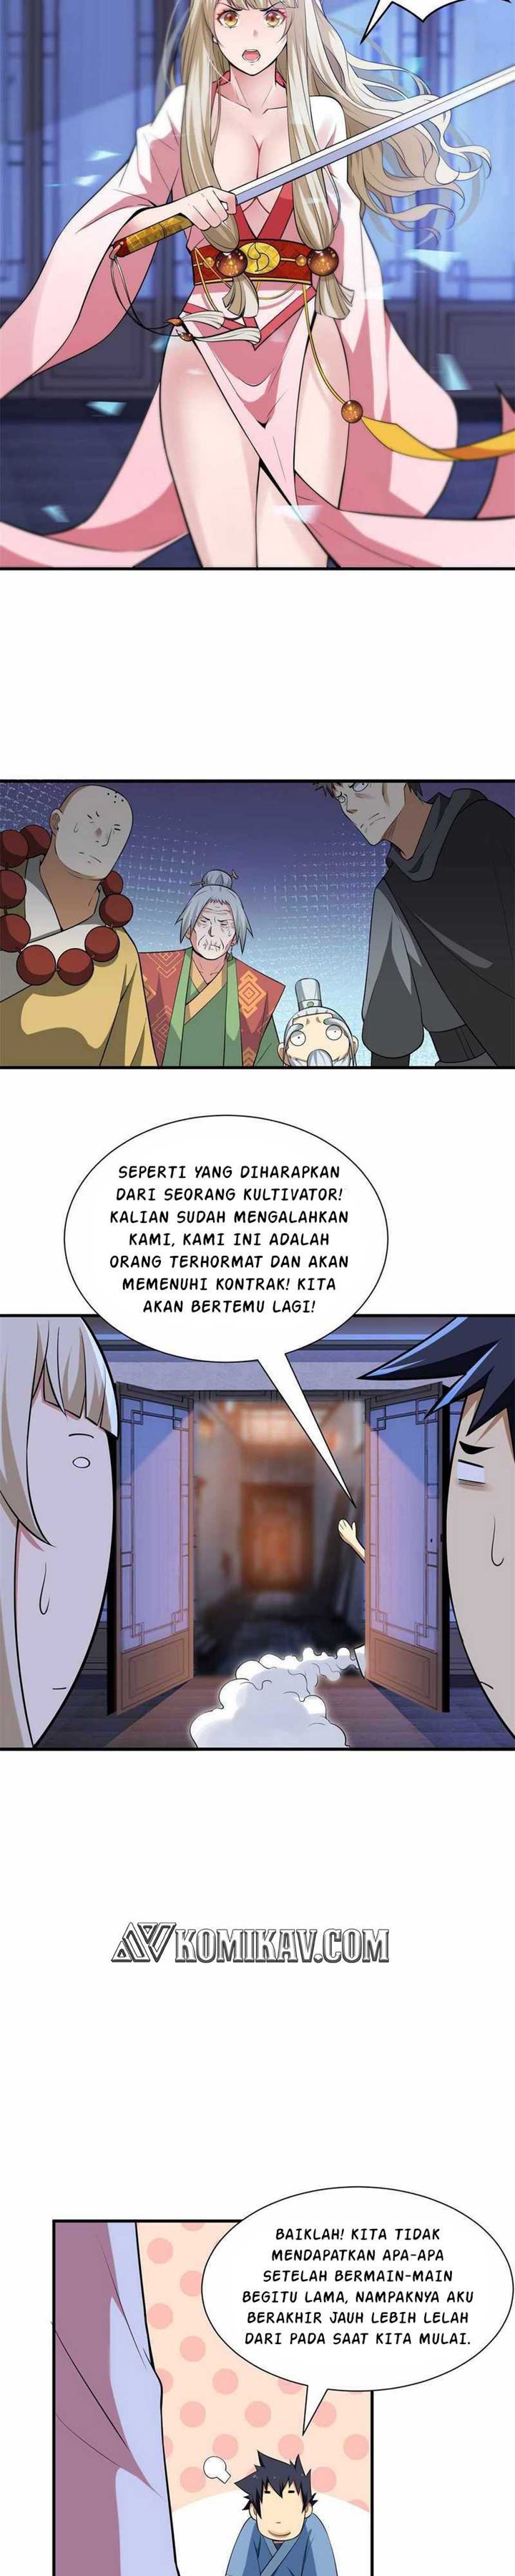 Dilarang COPAS - situs resmi www.mangacanblog.com - Komik i just want to be beaten to death by everyone 015 - chapter 15 16 Indonesia i just want to be beaten to death by everyone 015 - chapter 15 Terbaru 3|Baca Manga Komik Indonesia|Mangacan